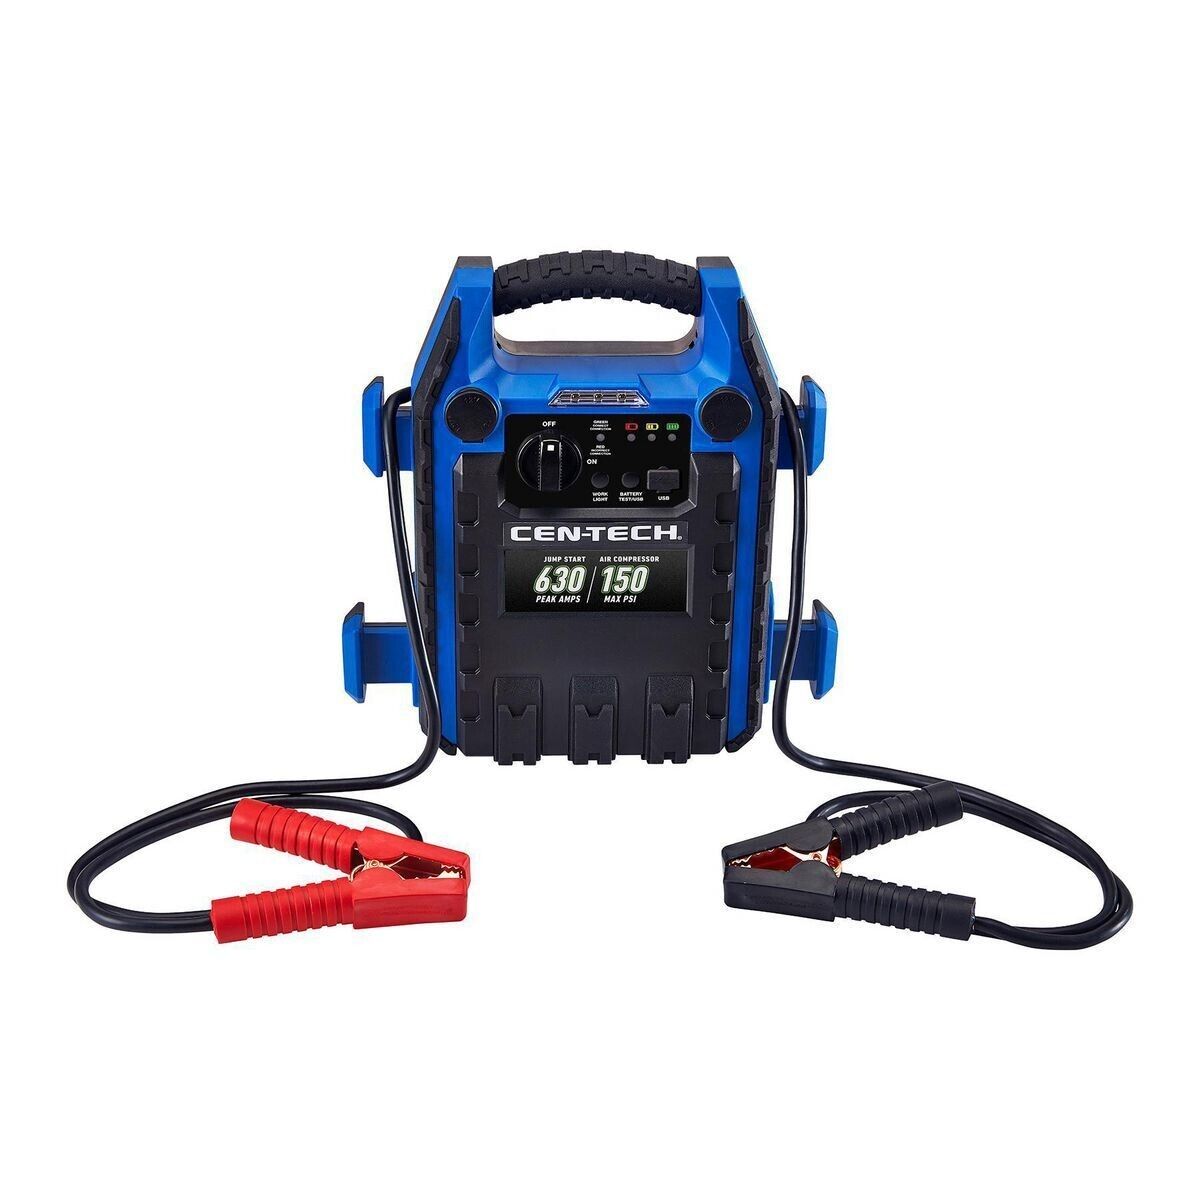 Durable and user-friendly interface of the CEN-TECH 630 Peak Amp Portable Jump Starter."